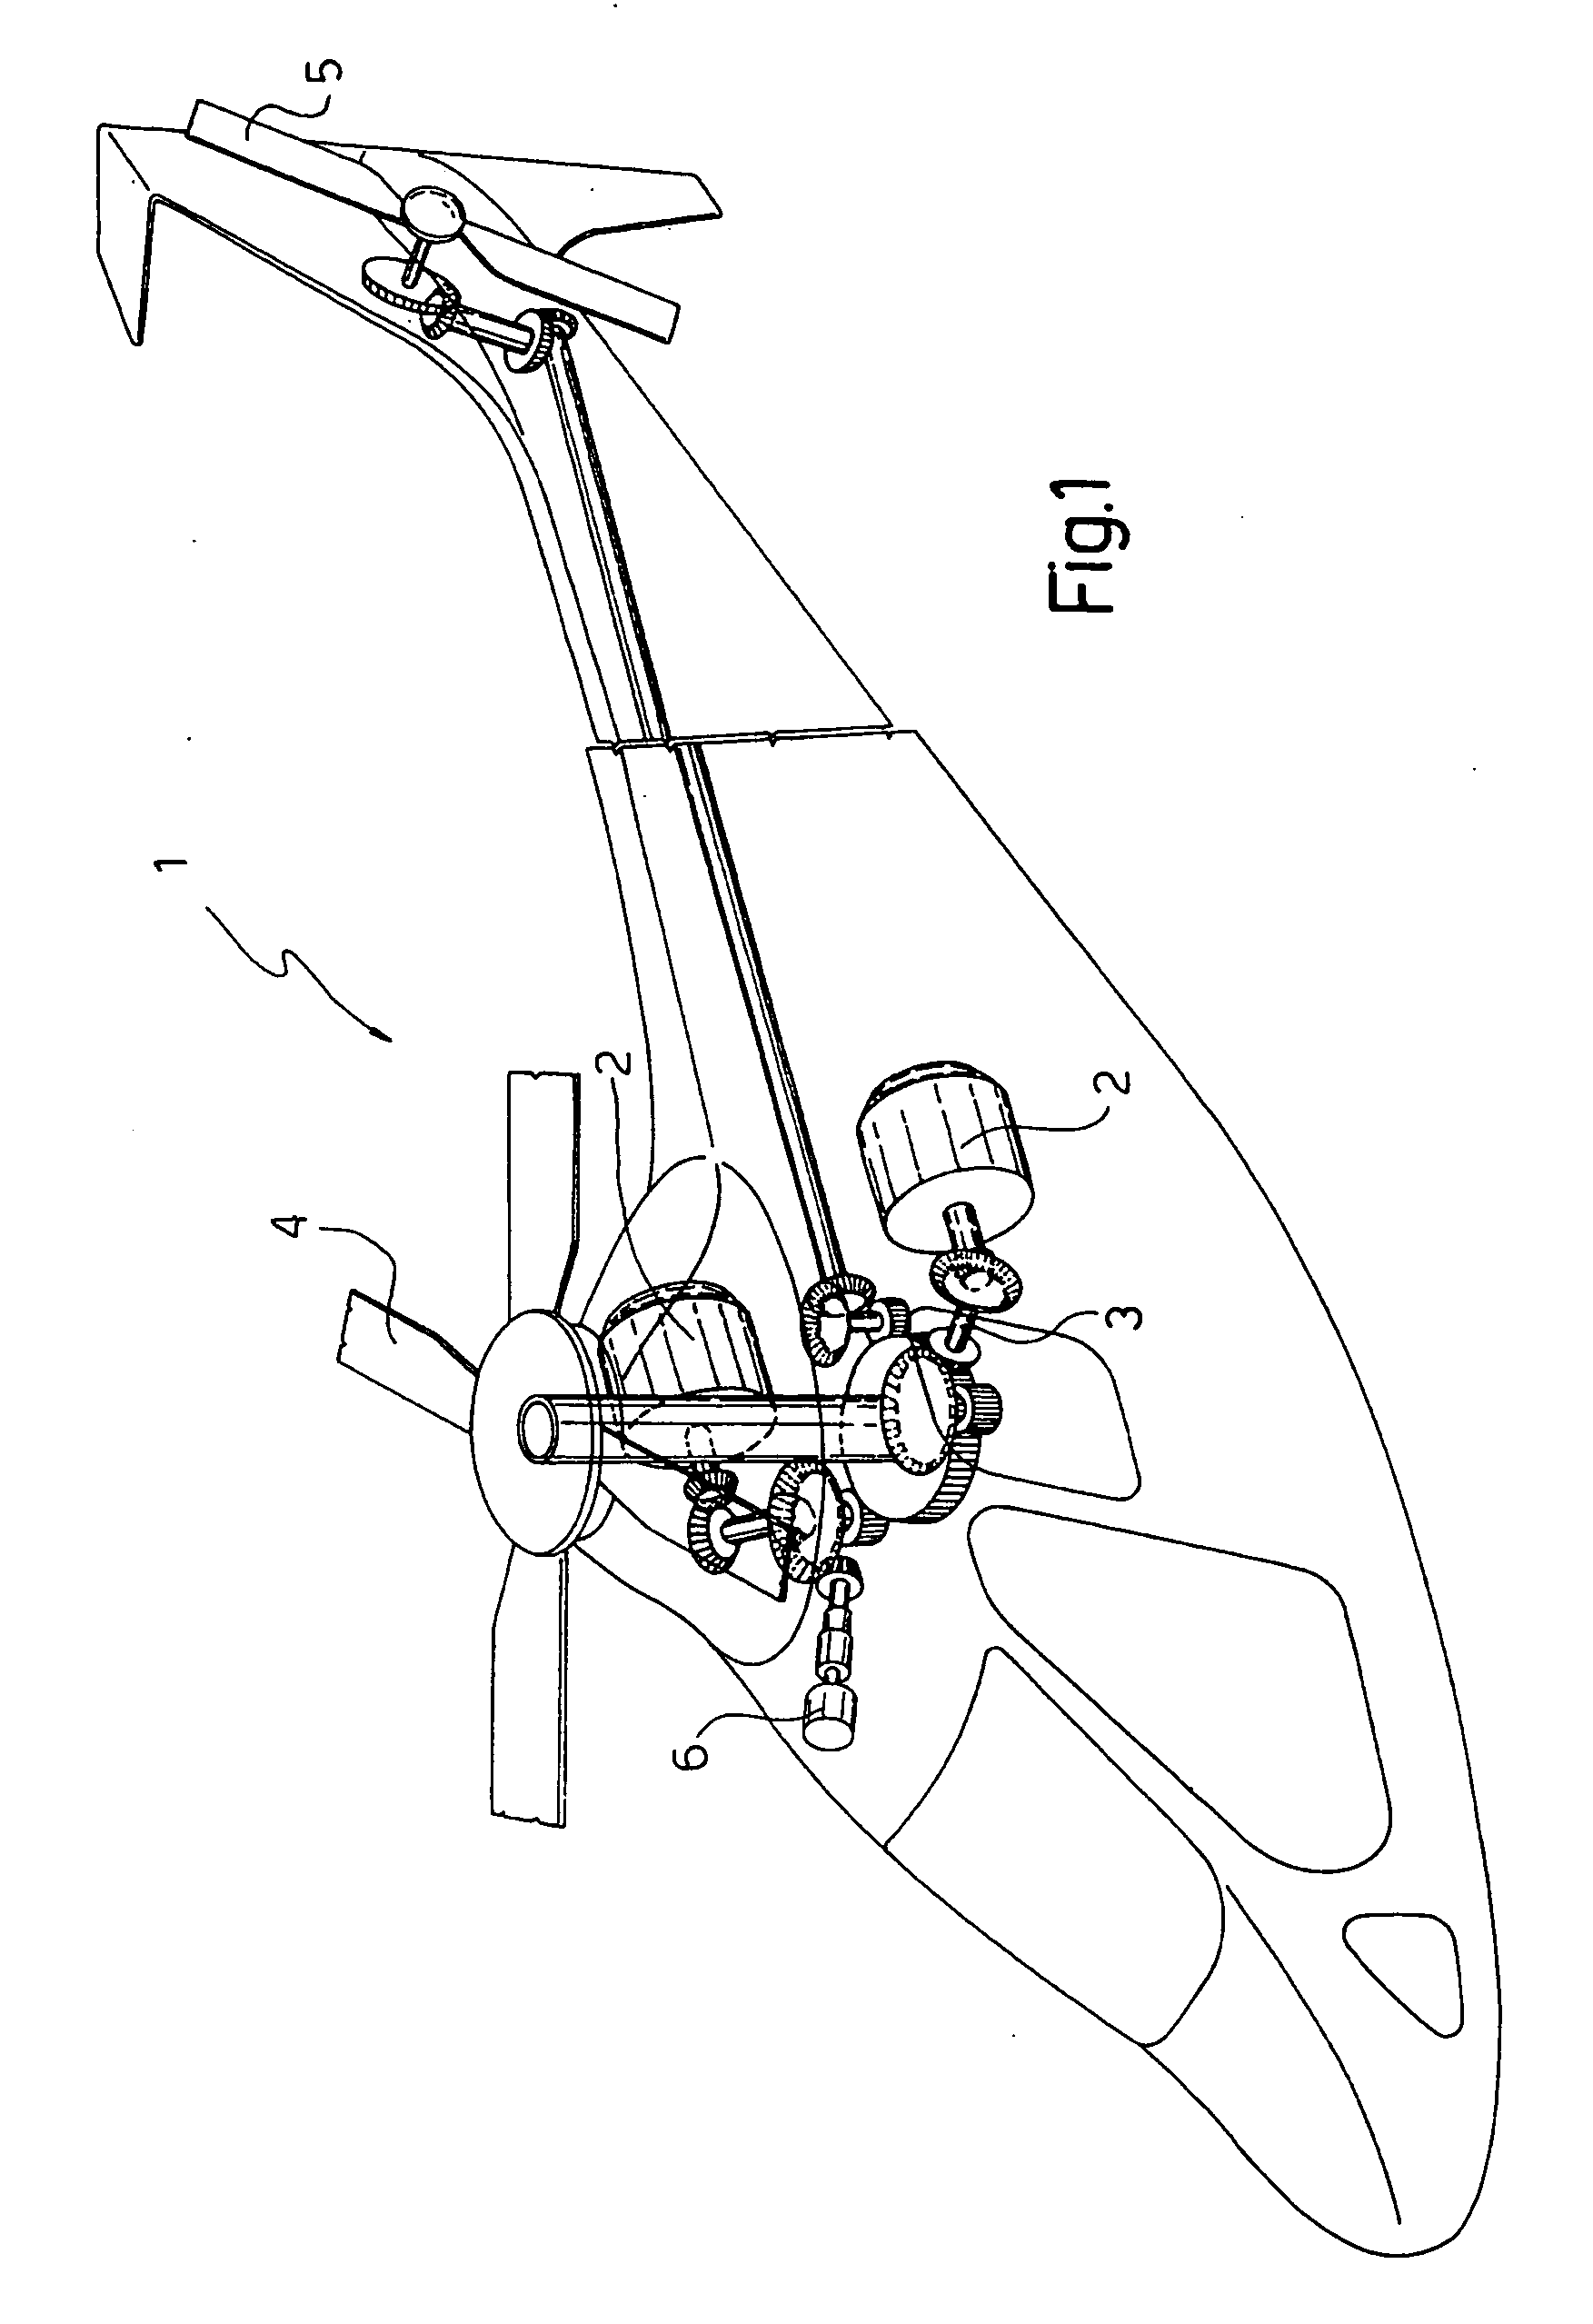 Helicopter with an auxiliary lubricating circuit